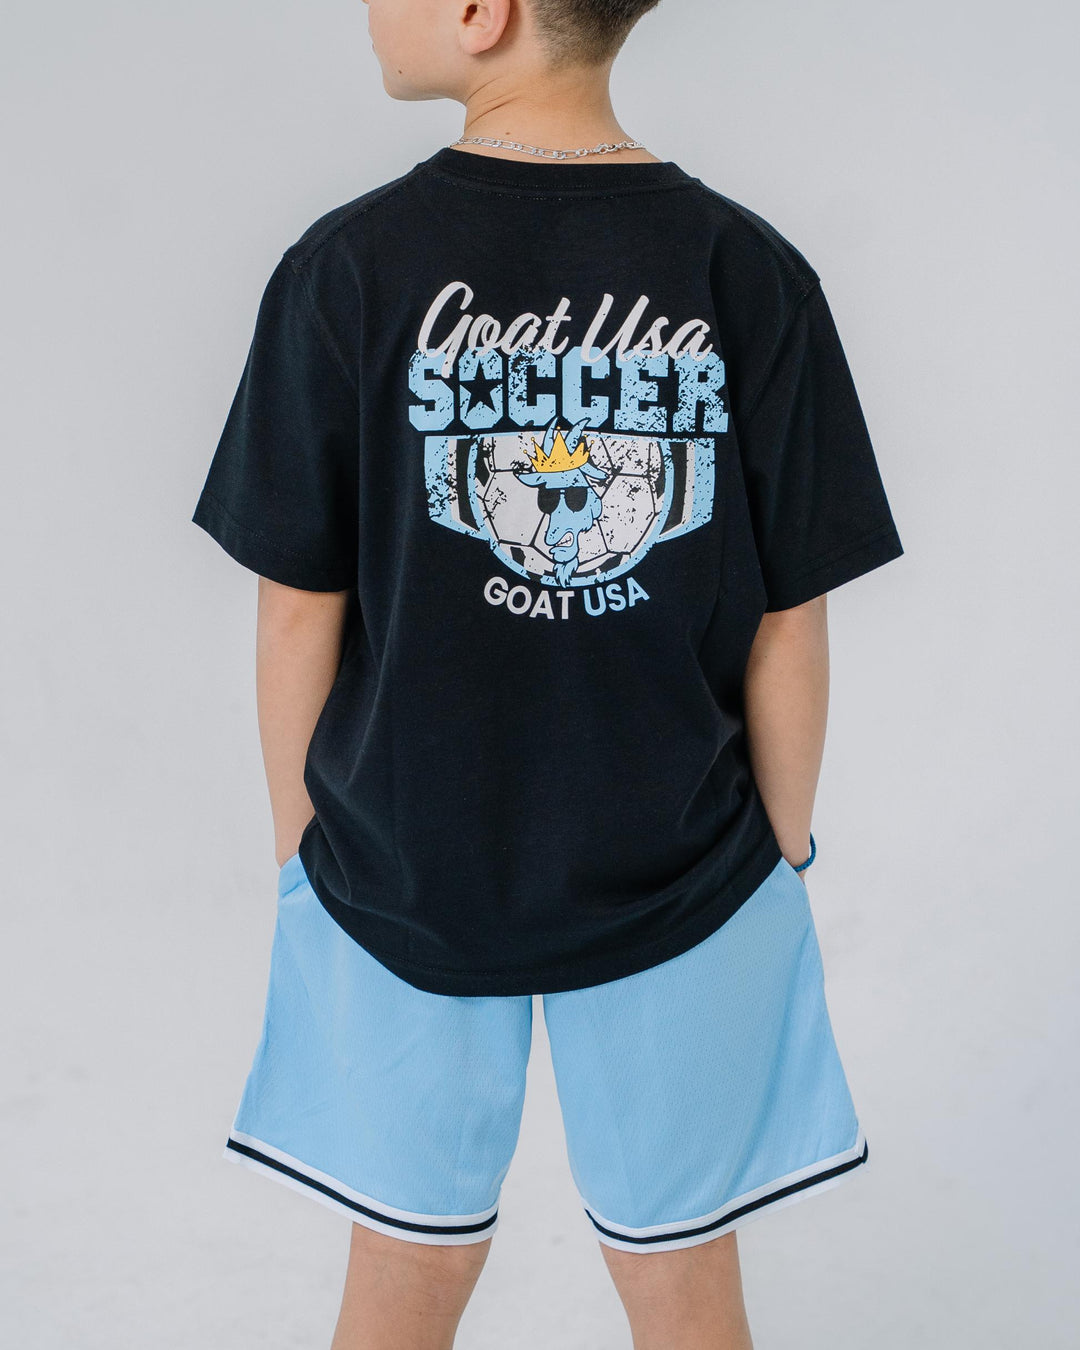 Kid wearing black t-shirt with soccer design that reads "GOAT USA SOCCER"